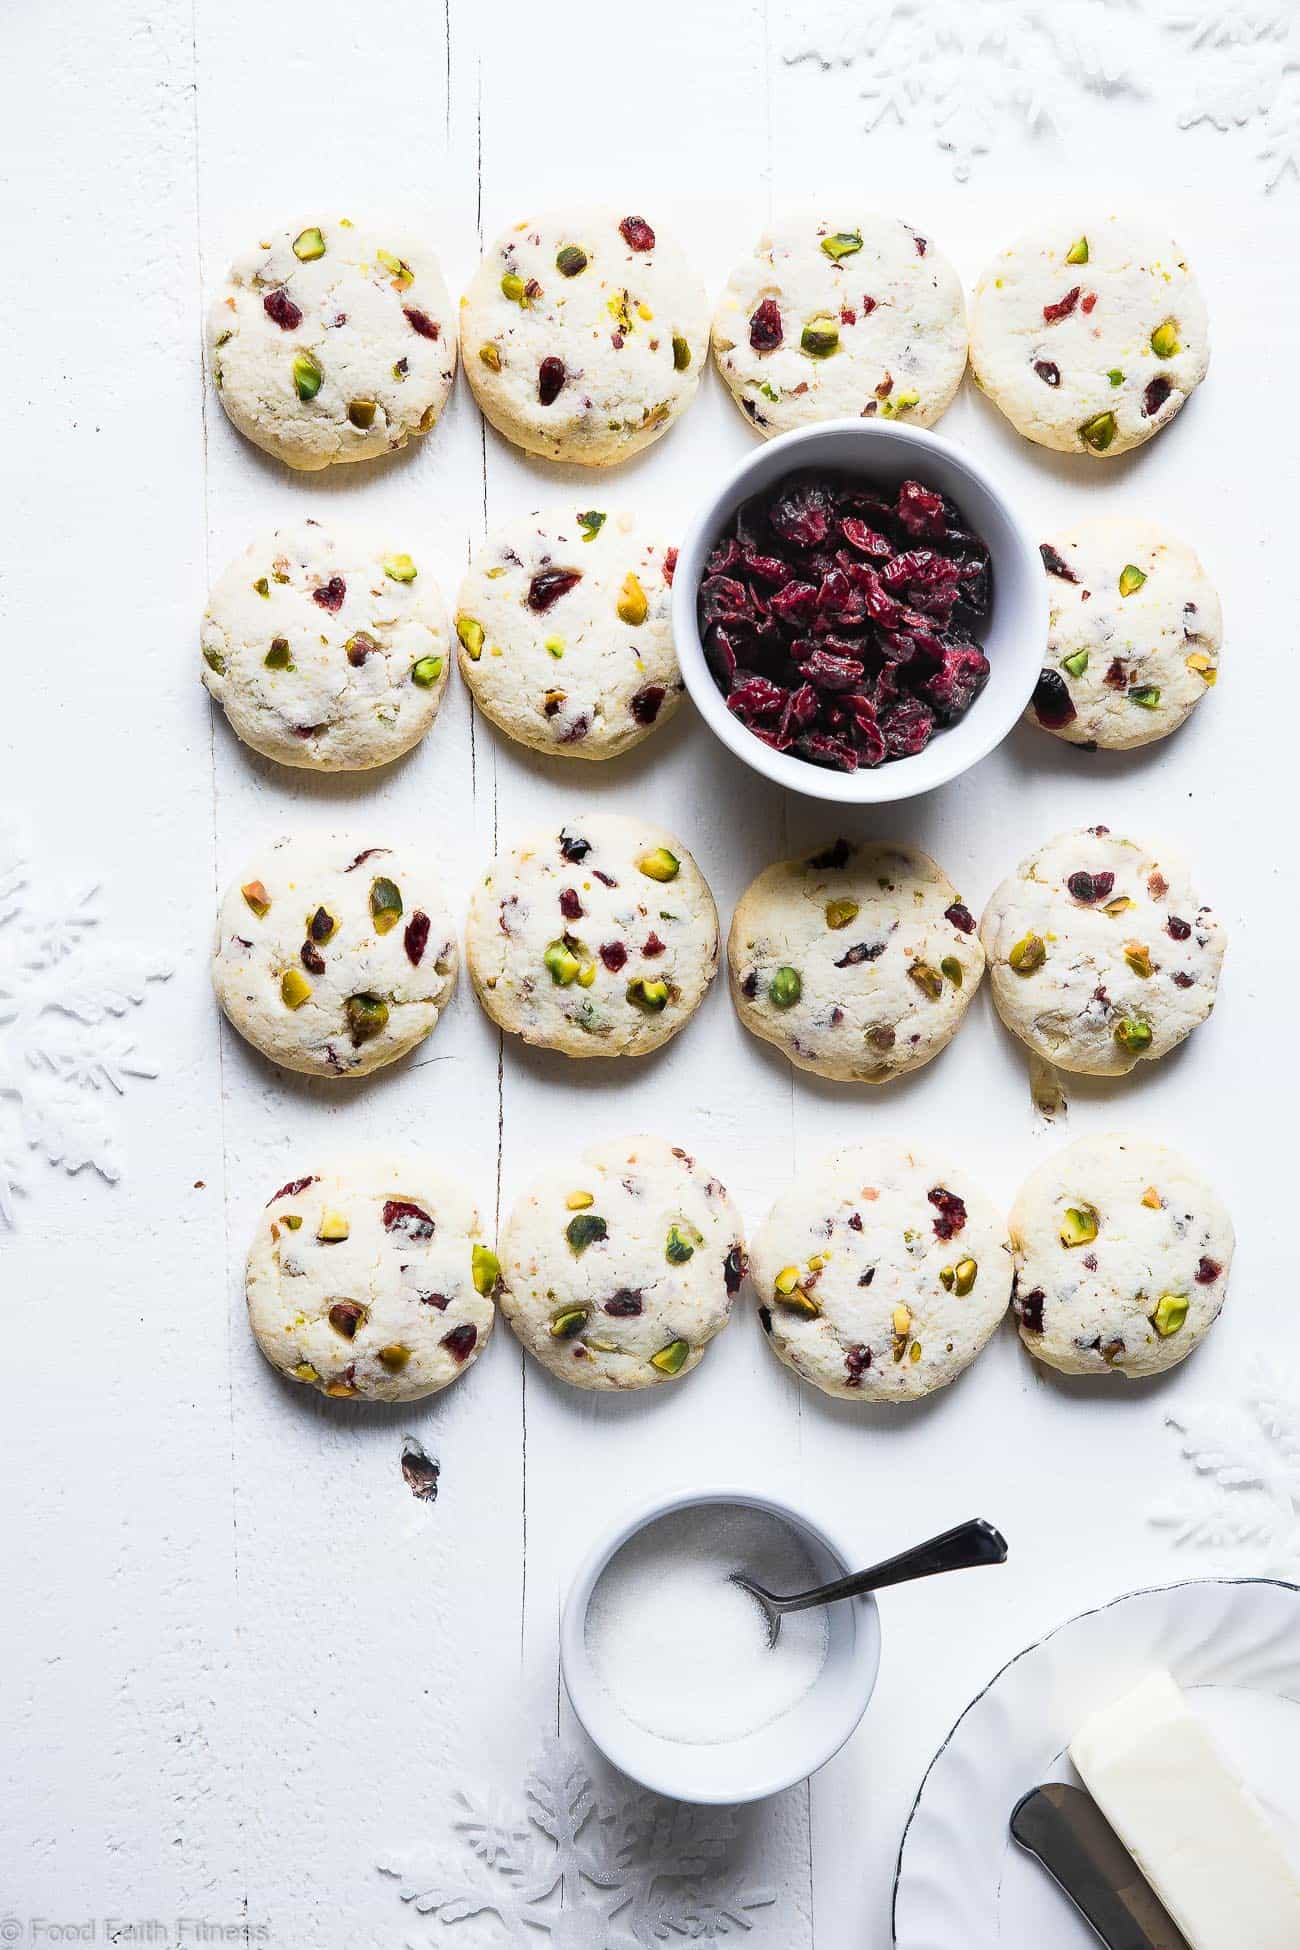 Chewy Gluten Free Sugar Free Sugar Cookies Recipe -  Need some sugar free cookie recipes? These Soft chewy sugar cookies have tangy and crunchy cranberries and pistachios! They're a healthier Christmas treat for only 95 calories! | Foodfaithfitness.com | @FoodFaithFit